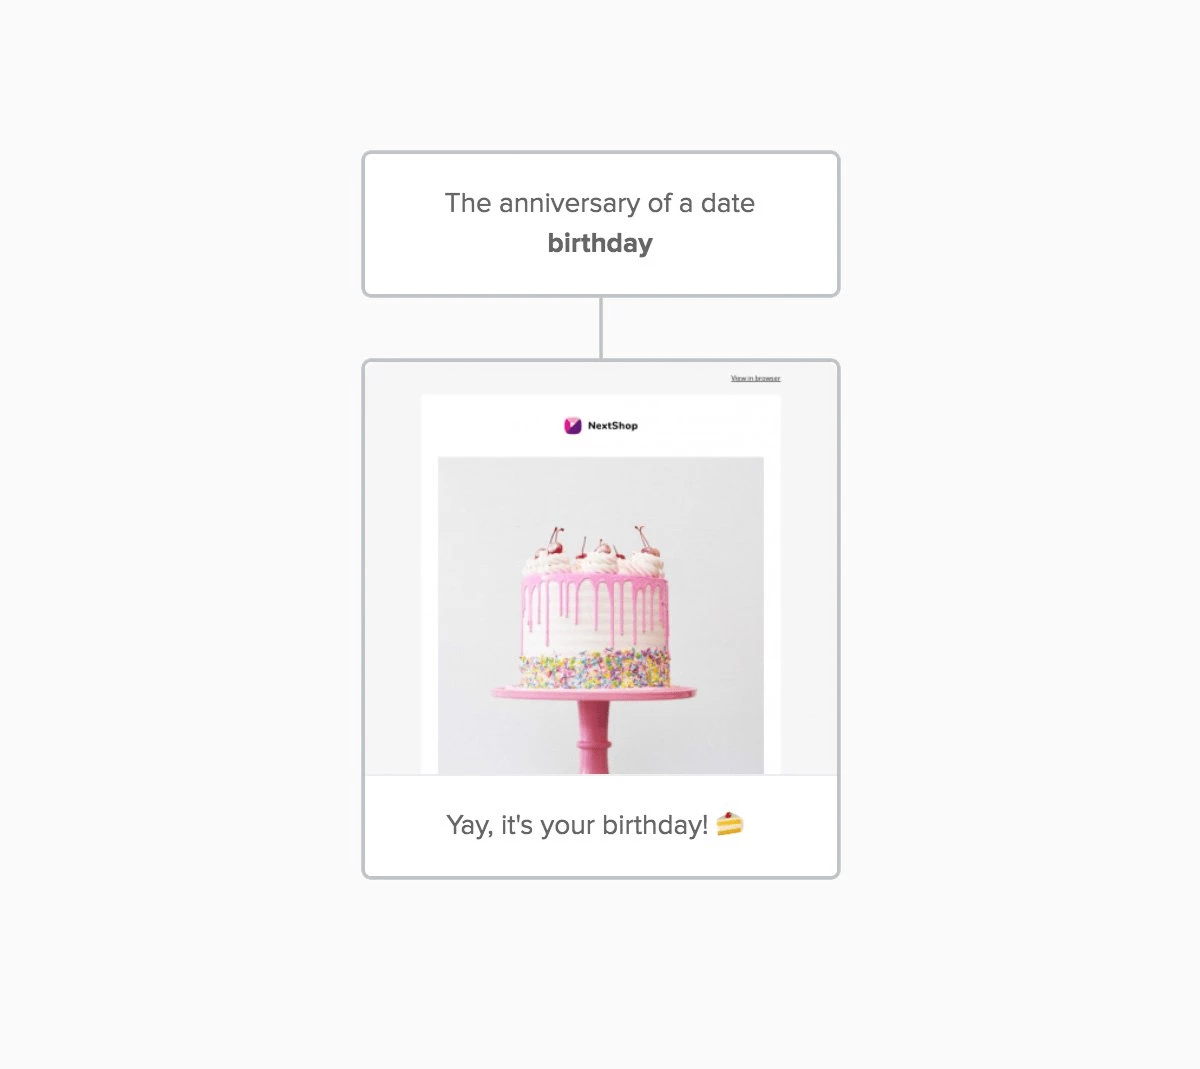 Anniversary link trigger birthday example automated email workflow - mailerlite